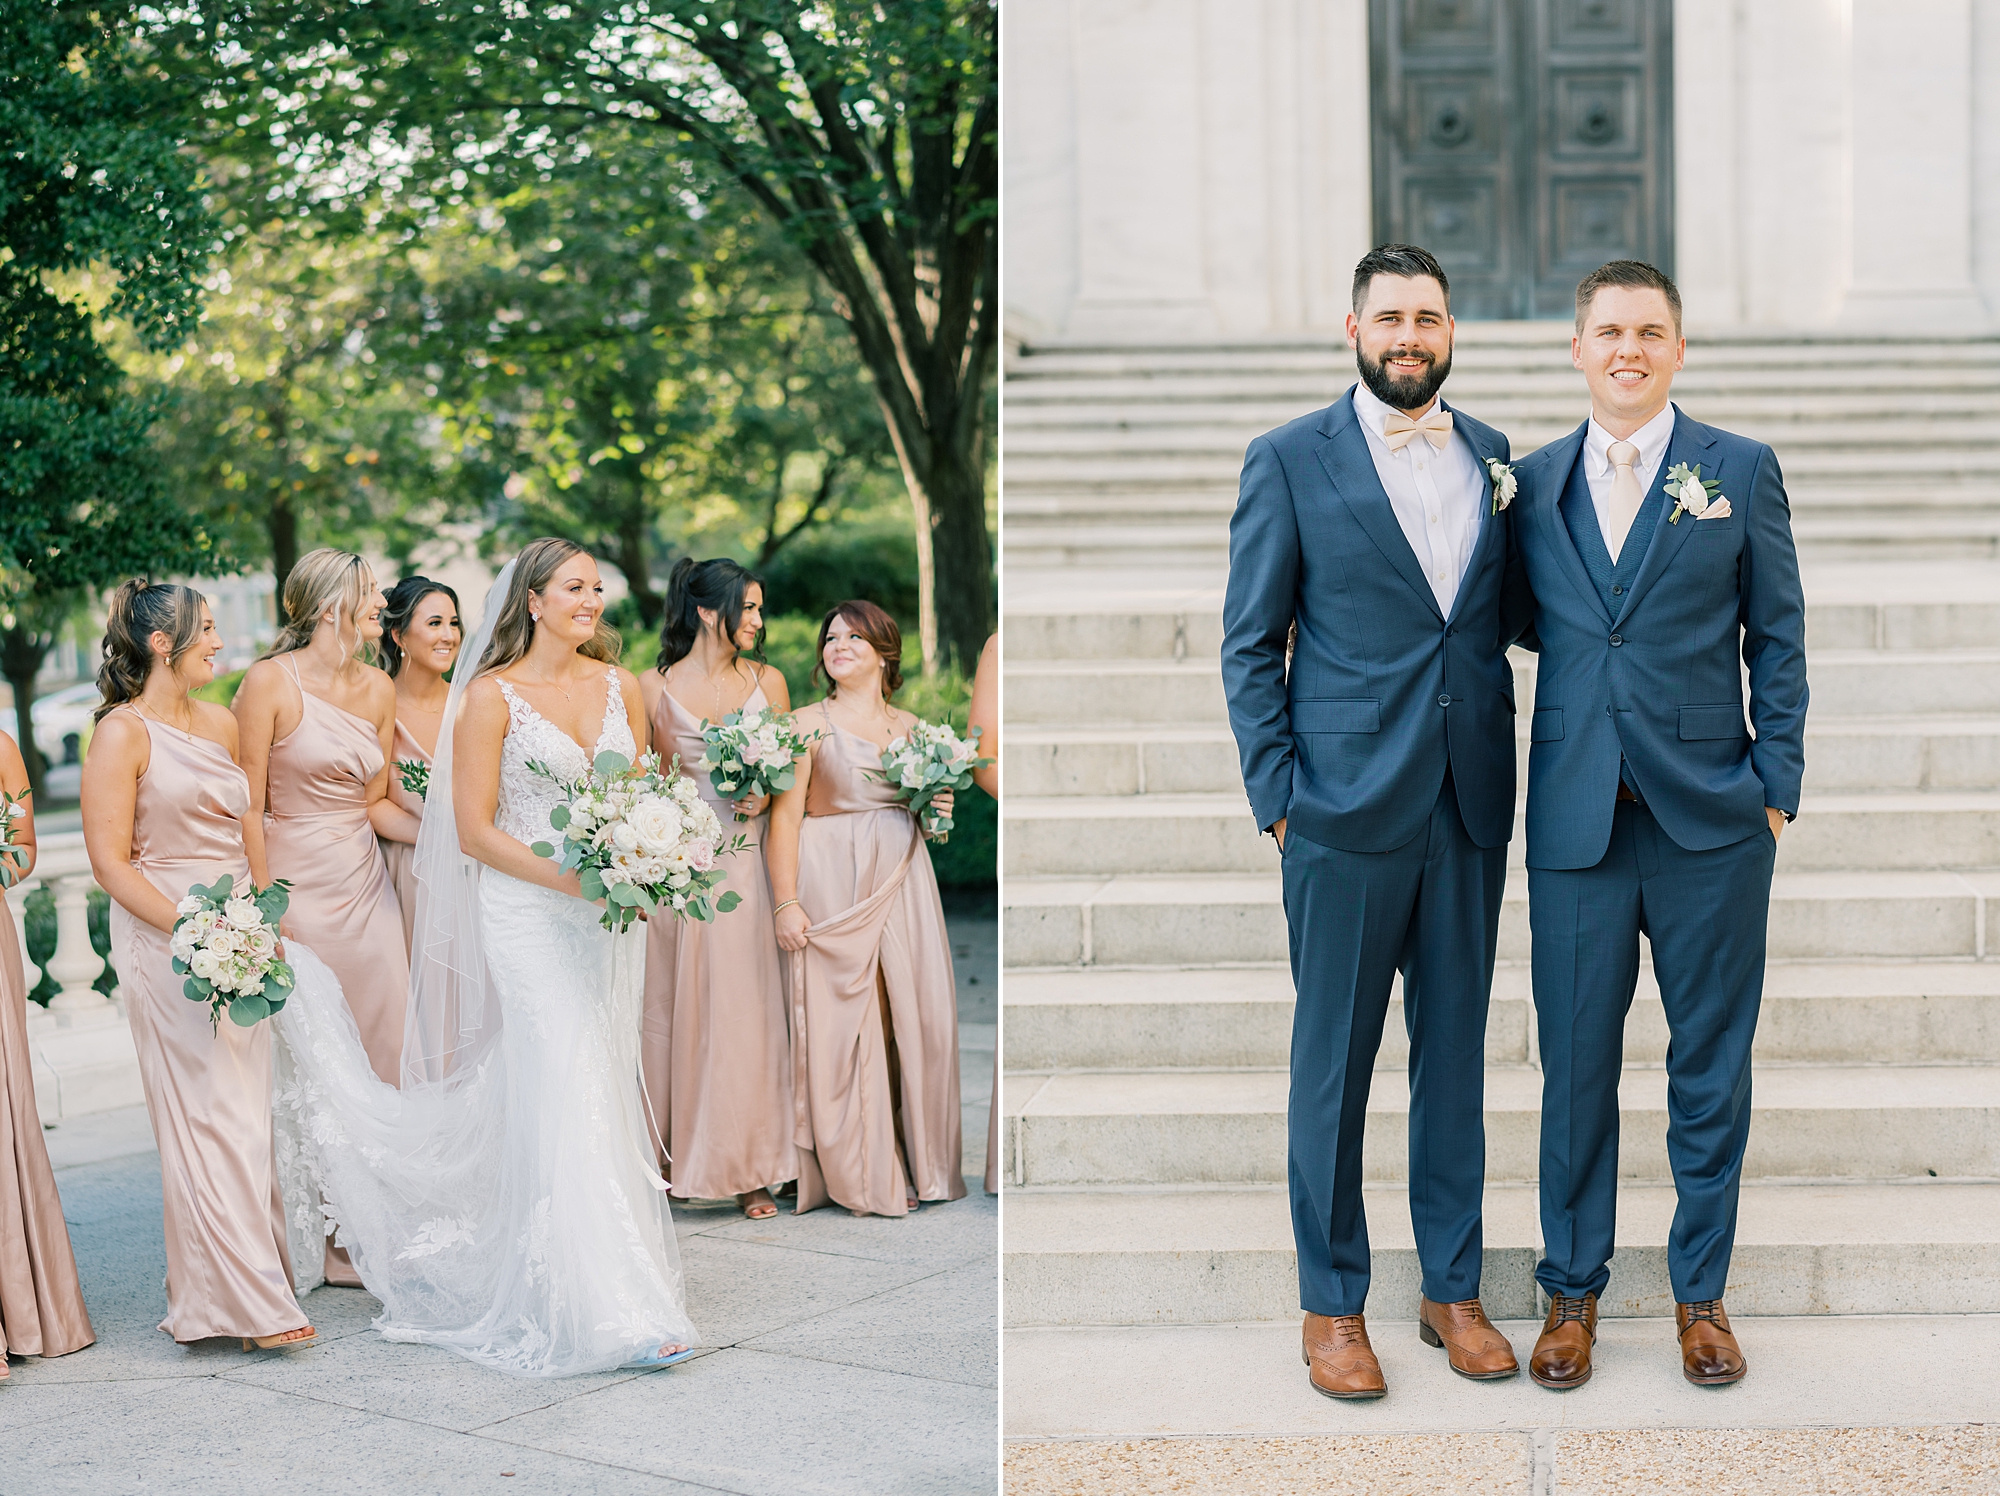 groom poses with groomsman in navy suit while bride walks with bridesmaids 